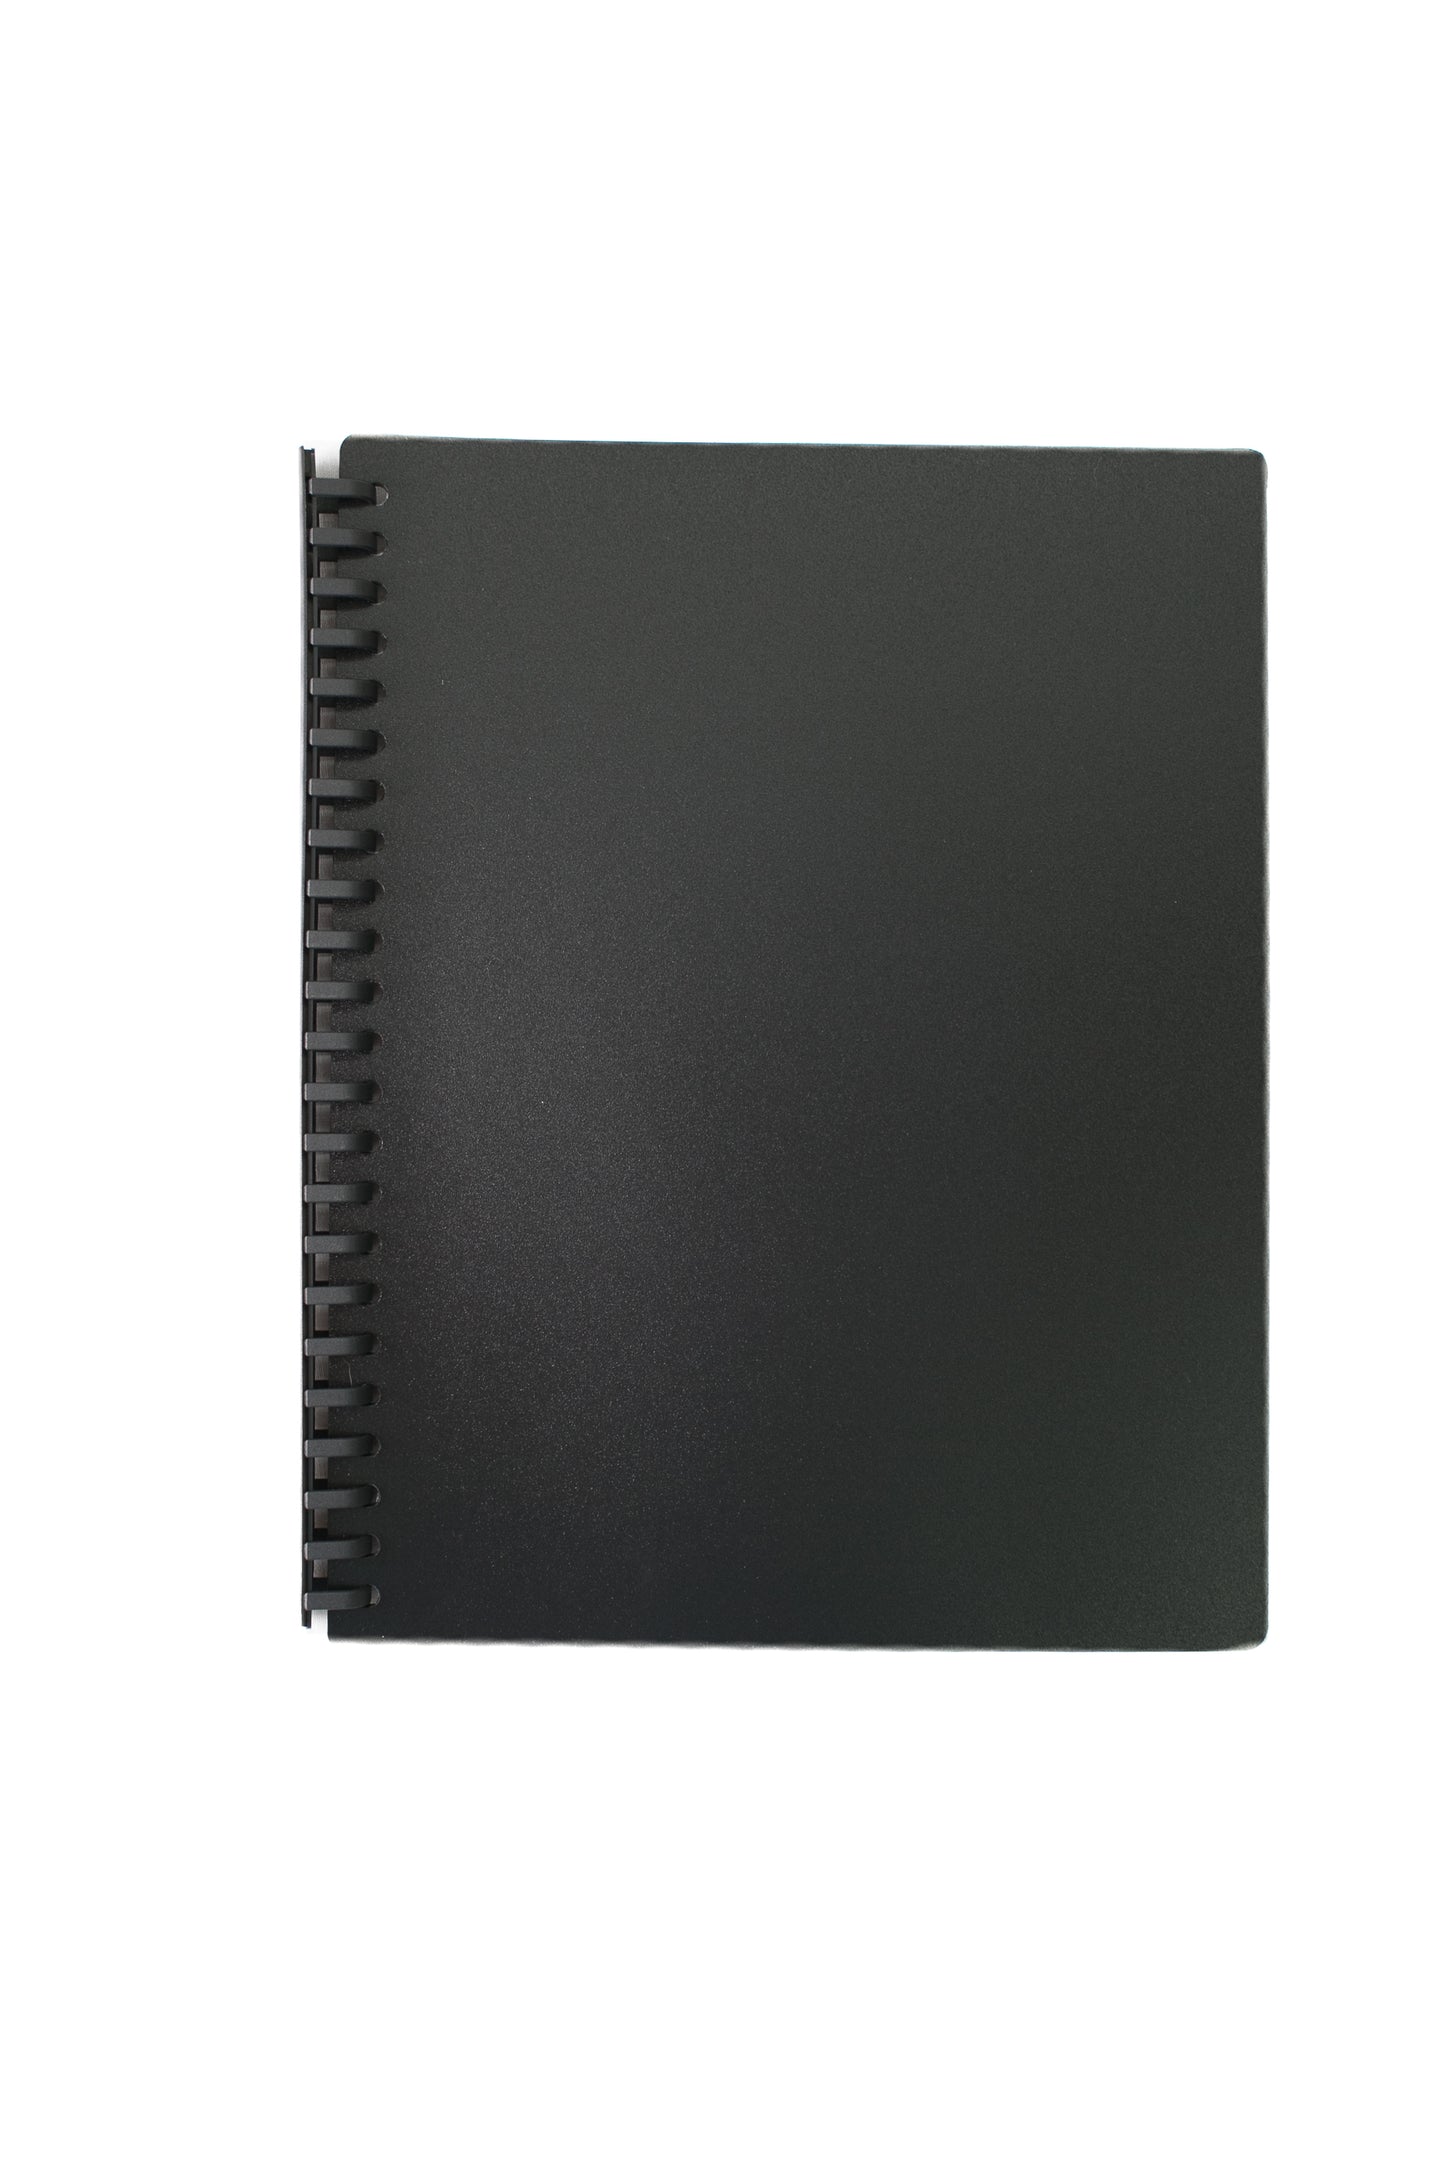 Clearbook 20 Pockets A4, Refillable, Black